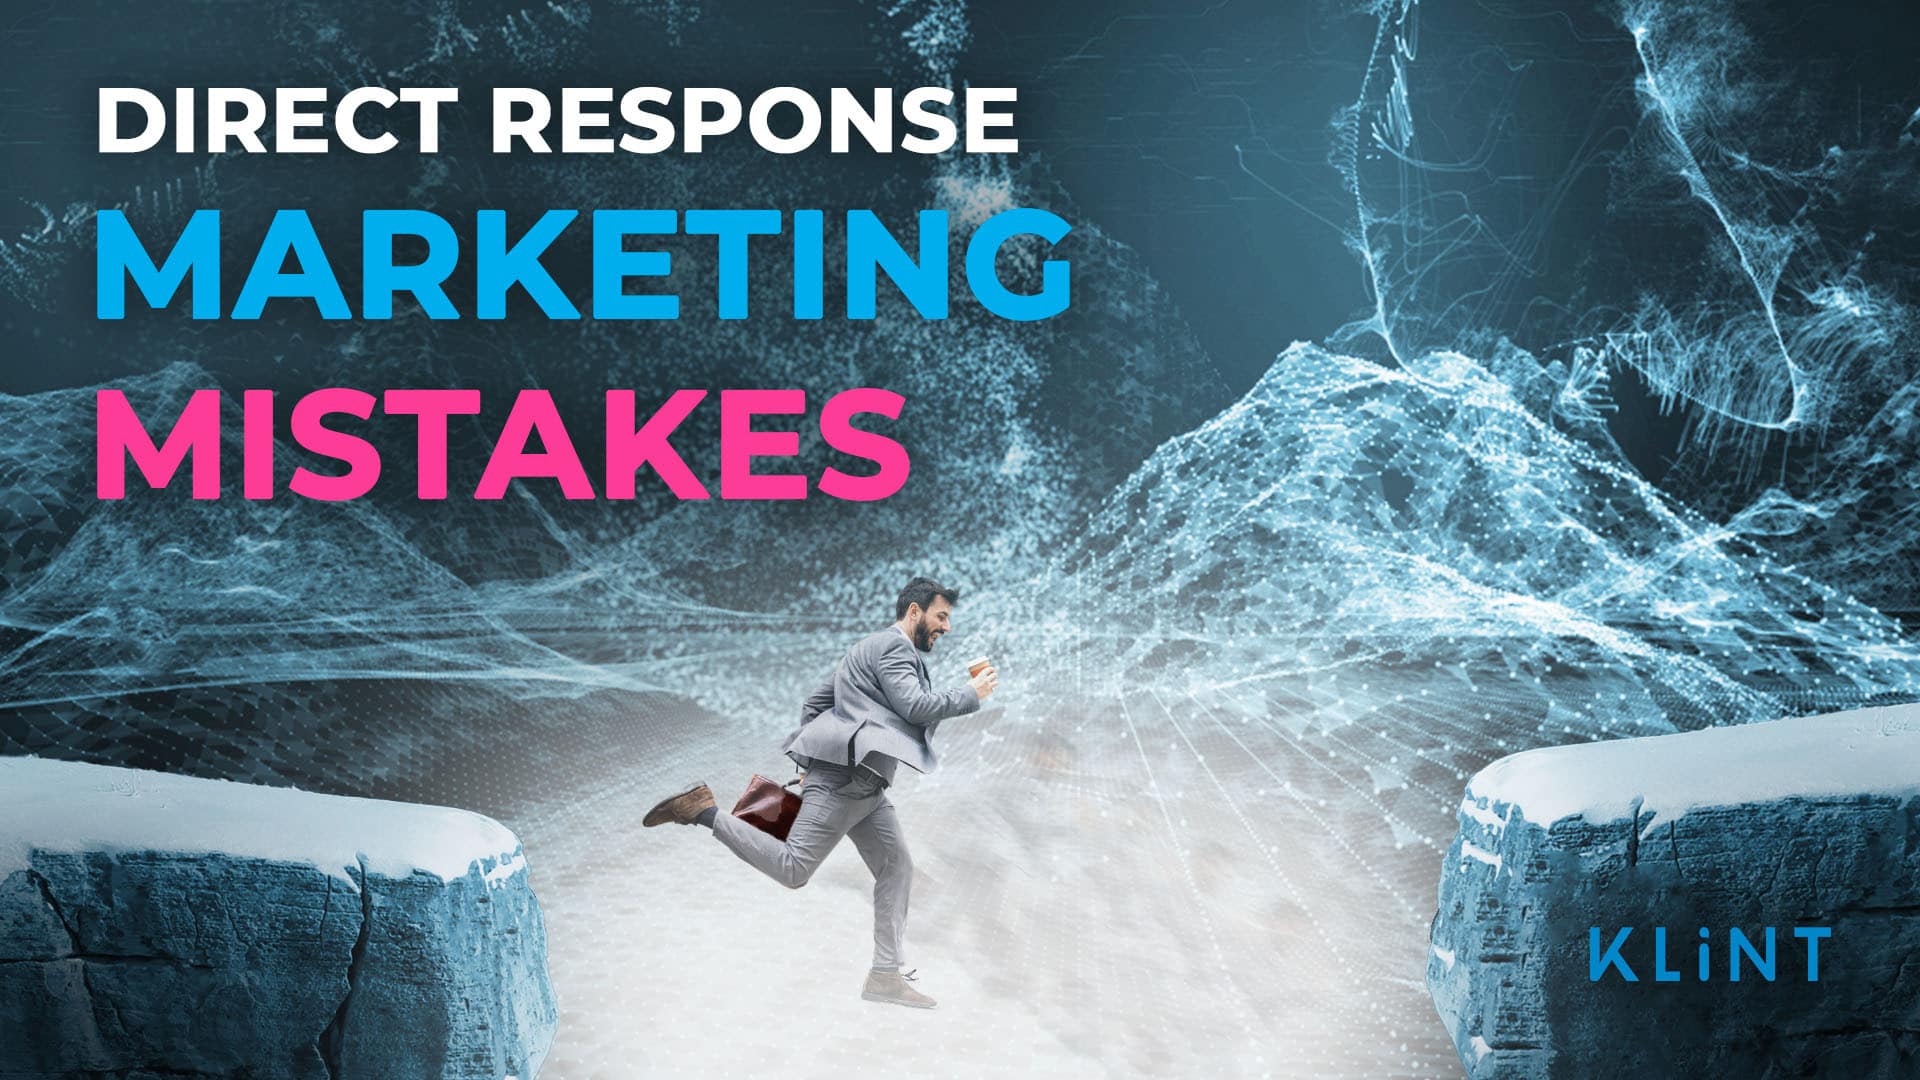 man in business suit jumping off a cliff. text overlaid: "direct response marketing mistakes"